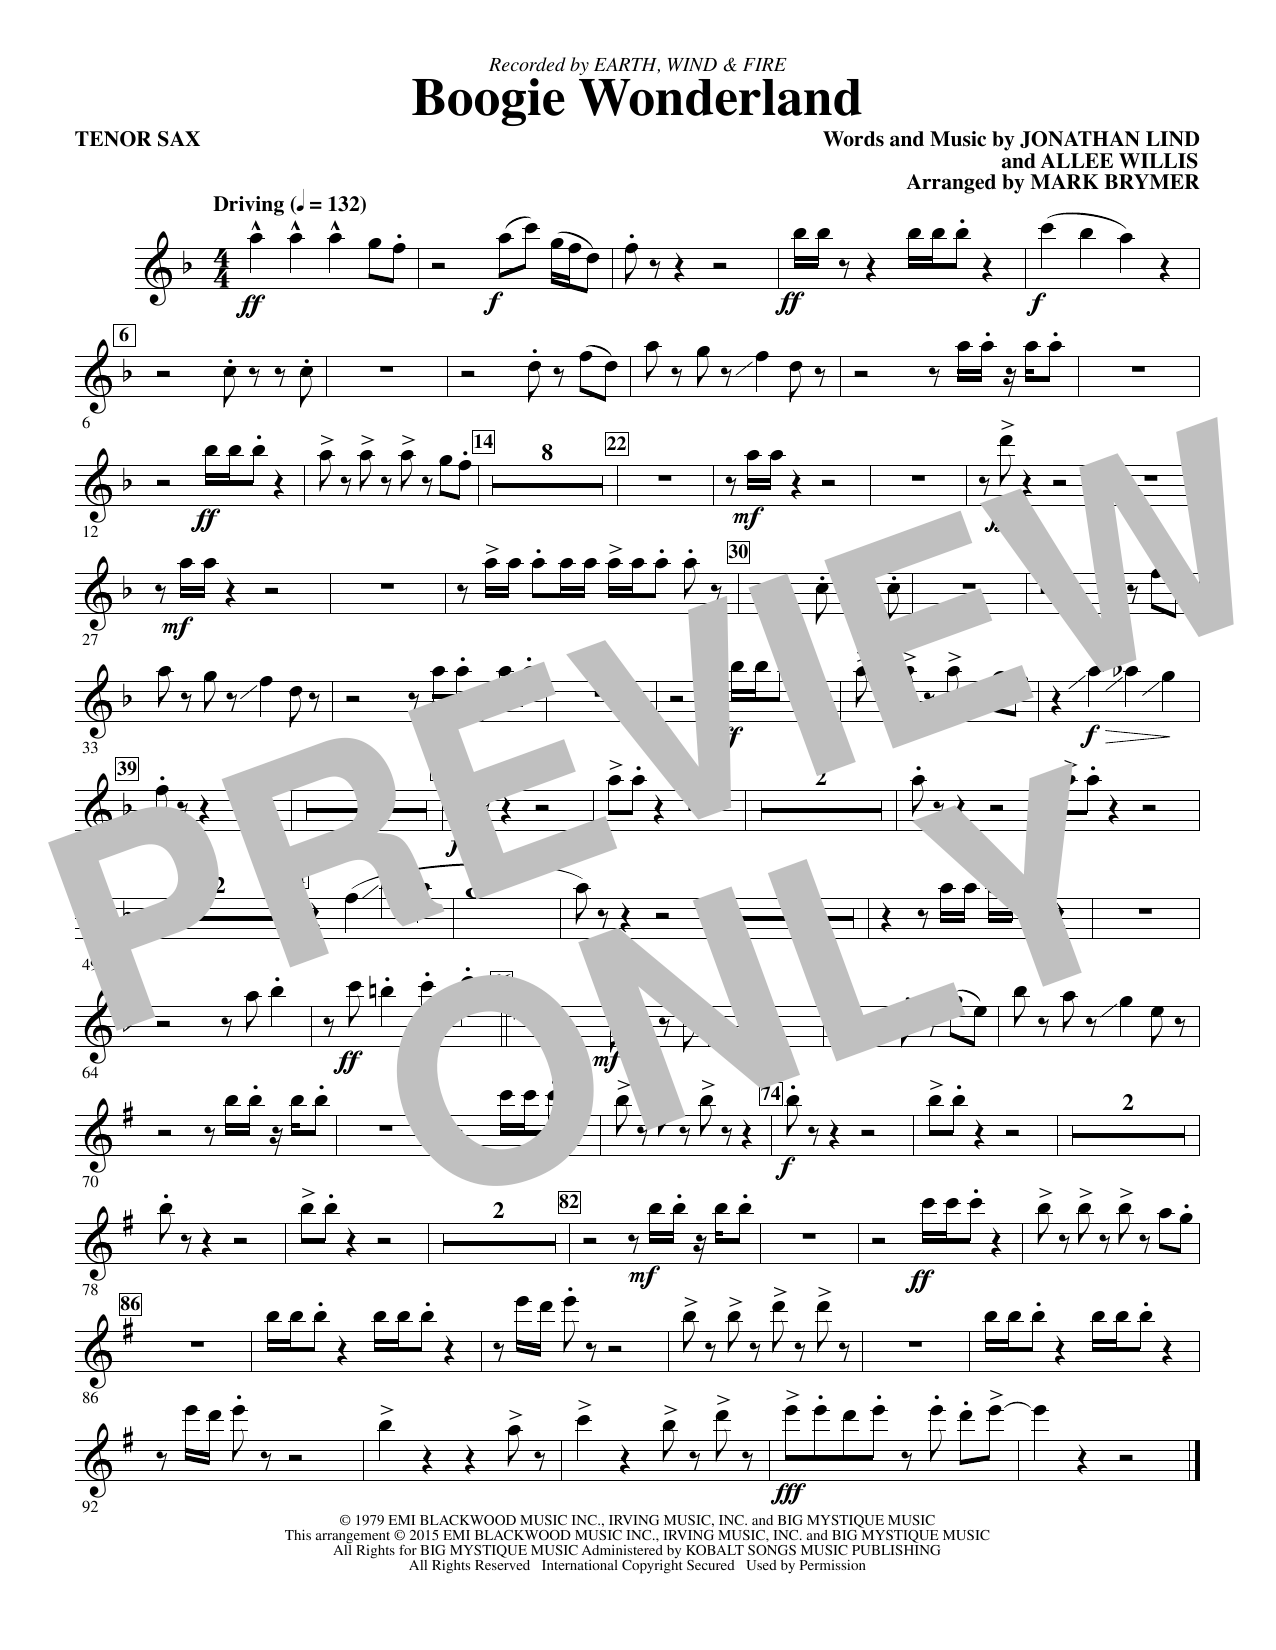 Earth, Wind & Fire Boogie Wonderland - Tenor Saxophone sheet music notes and chords. Download Printable PDF.